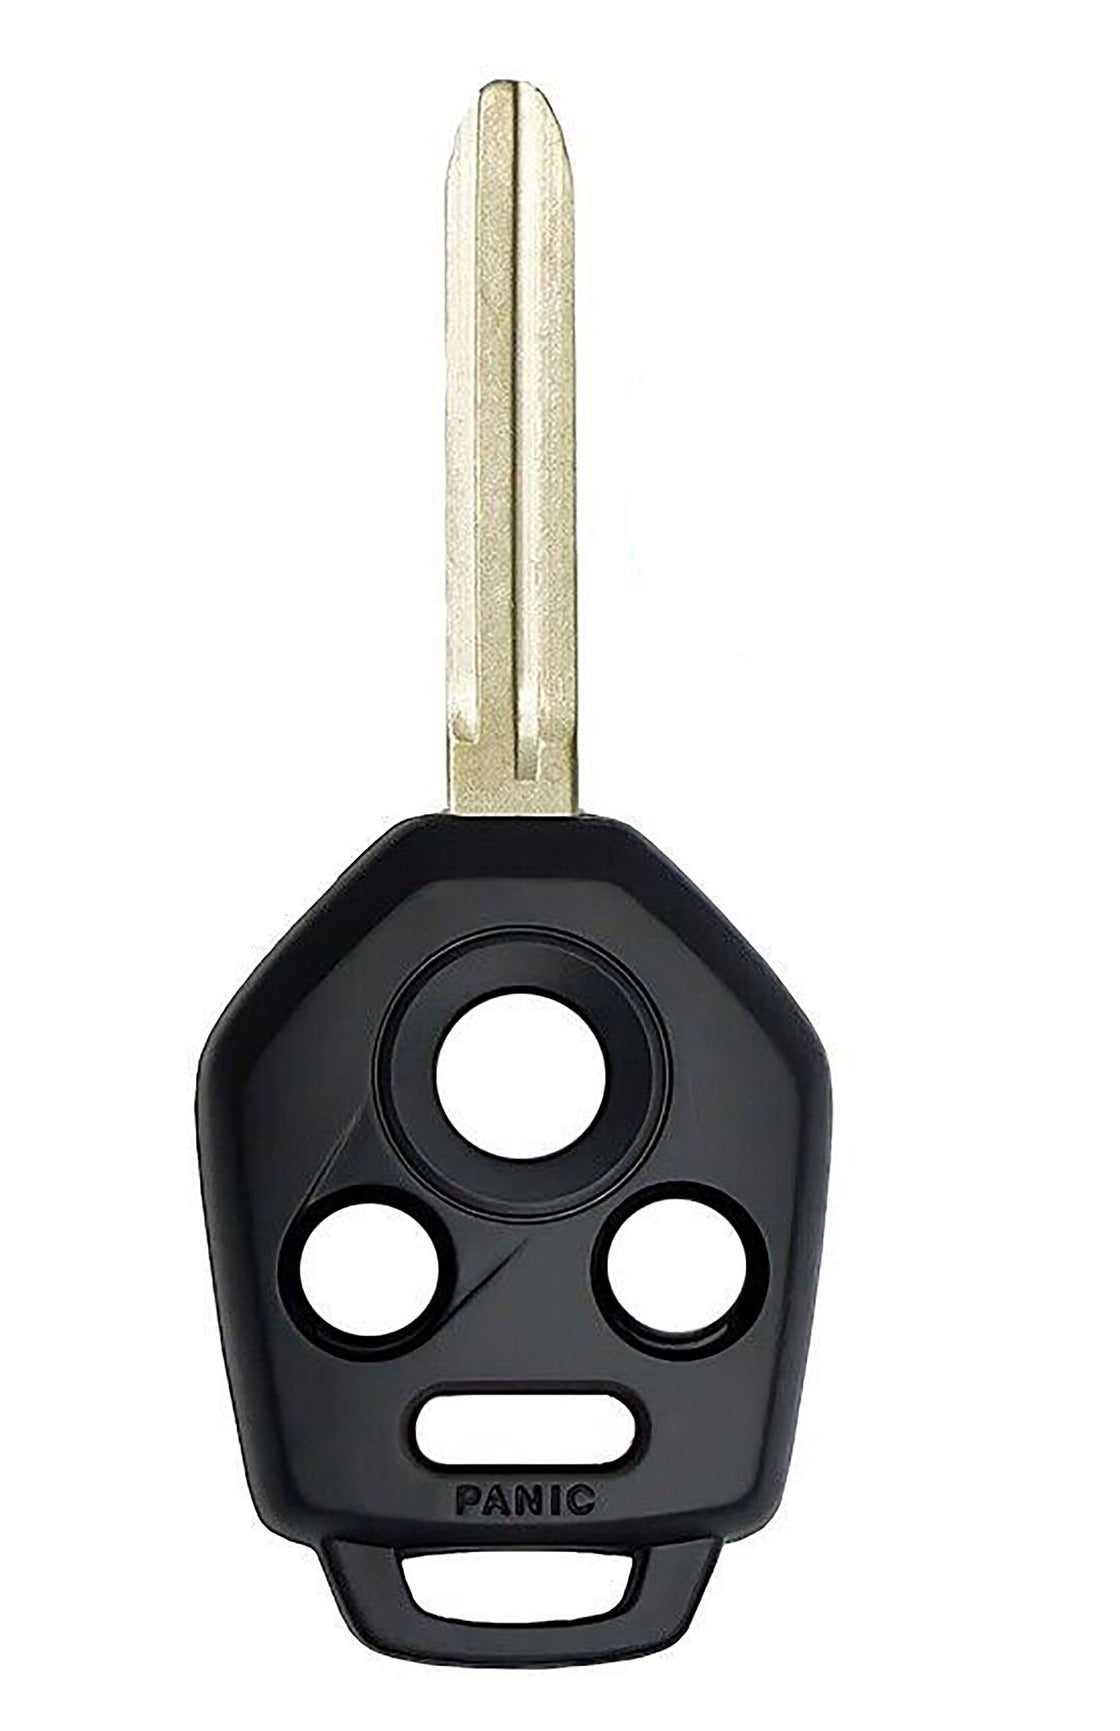 1x New Replacement Key Fob Remote SHELL / CASE Compatible with & Fit For Subaru Vehicles - MPN CWTWB1U811-08 (NO electronics or Chip inside)